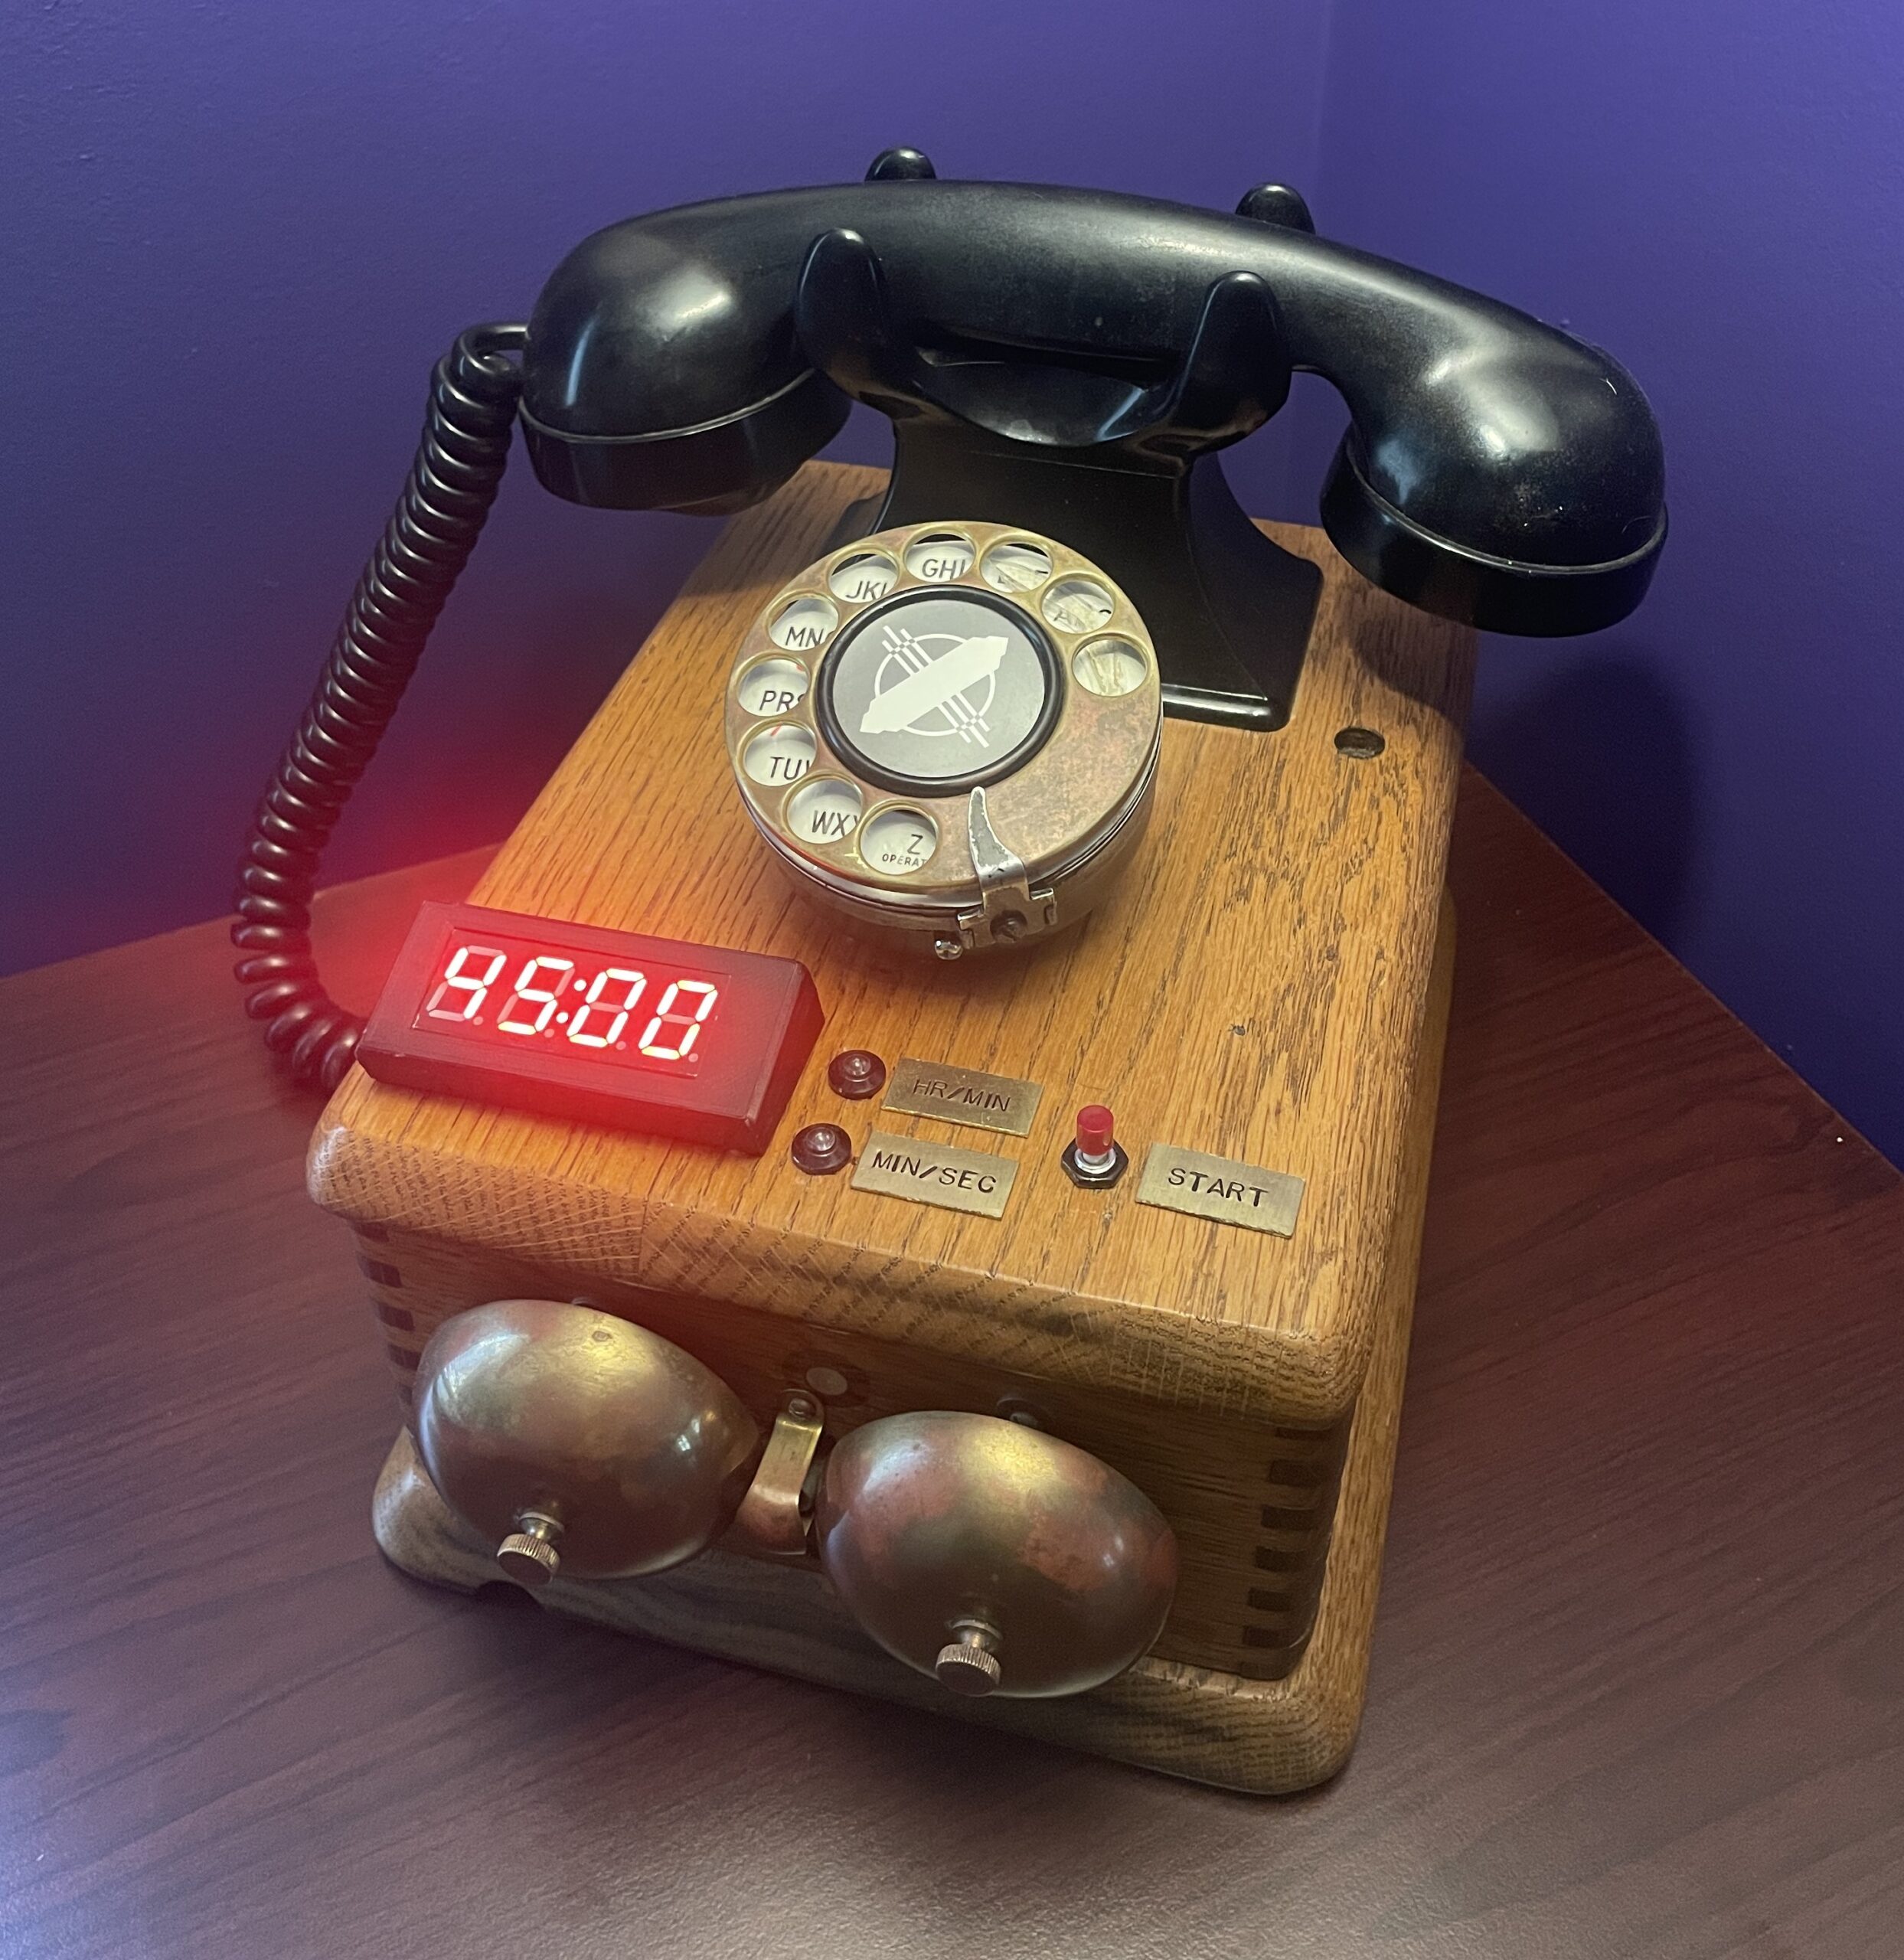 Vintage rotary phone becomes stylish kitchen timer